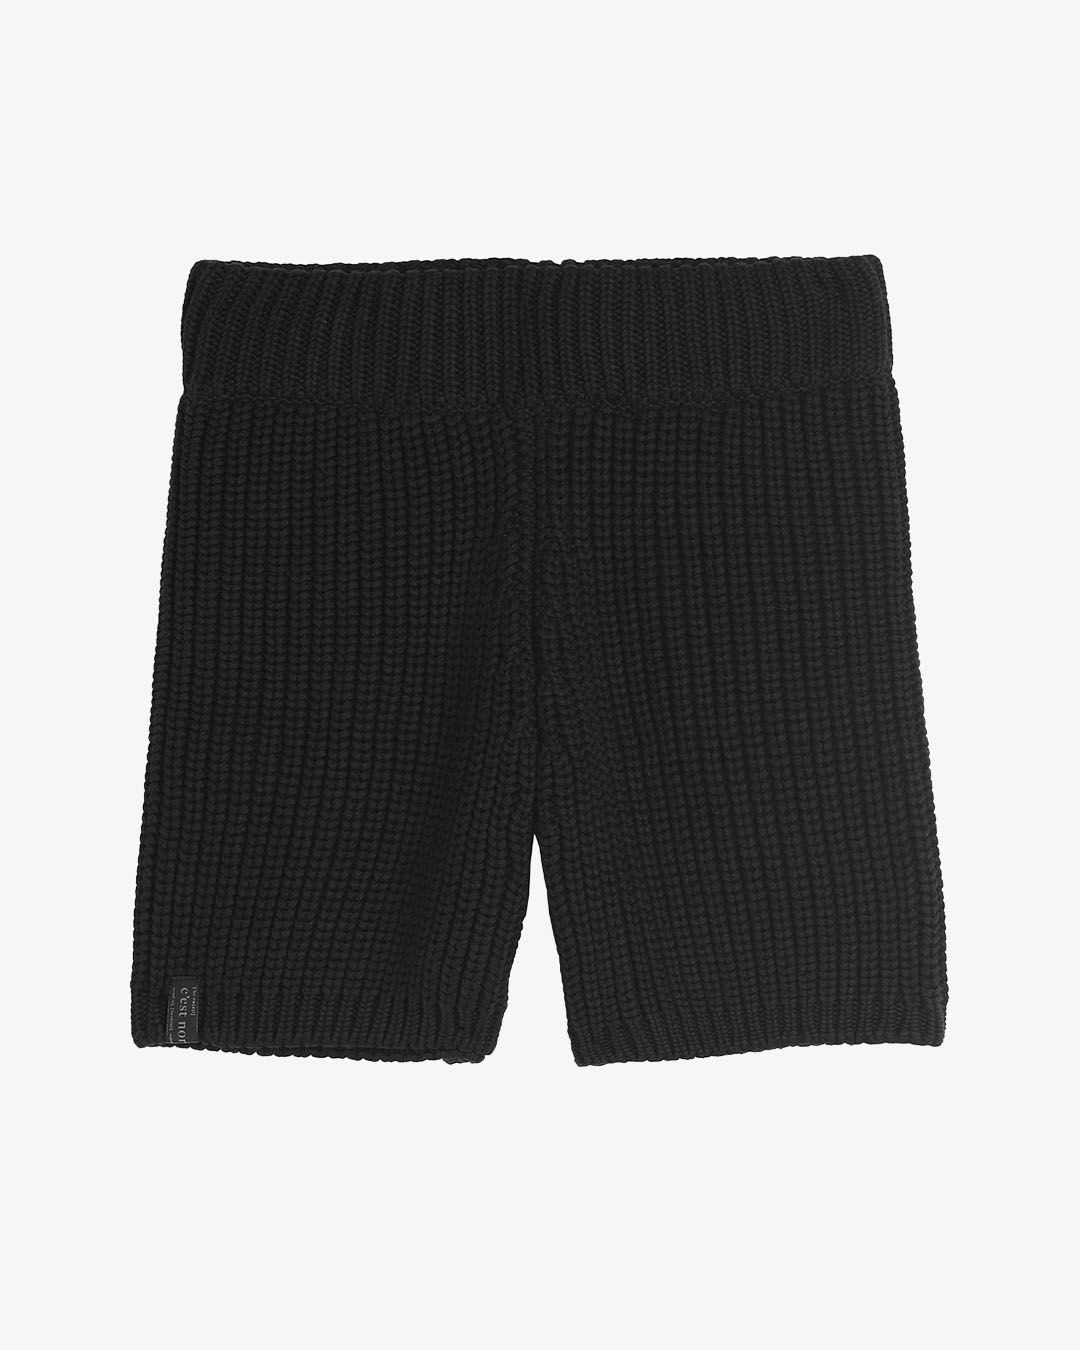 The Knit Shorts